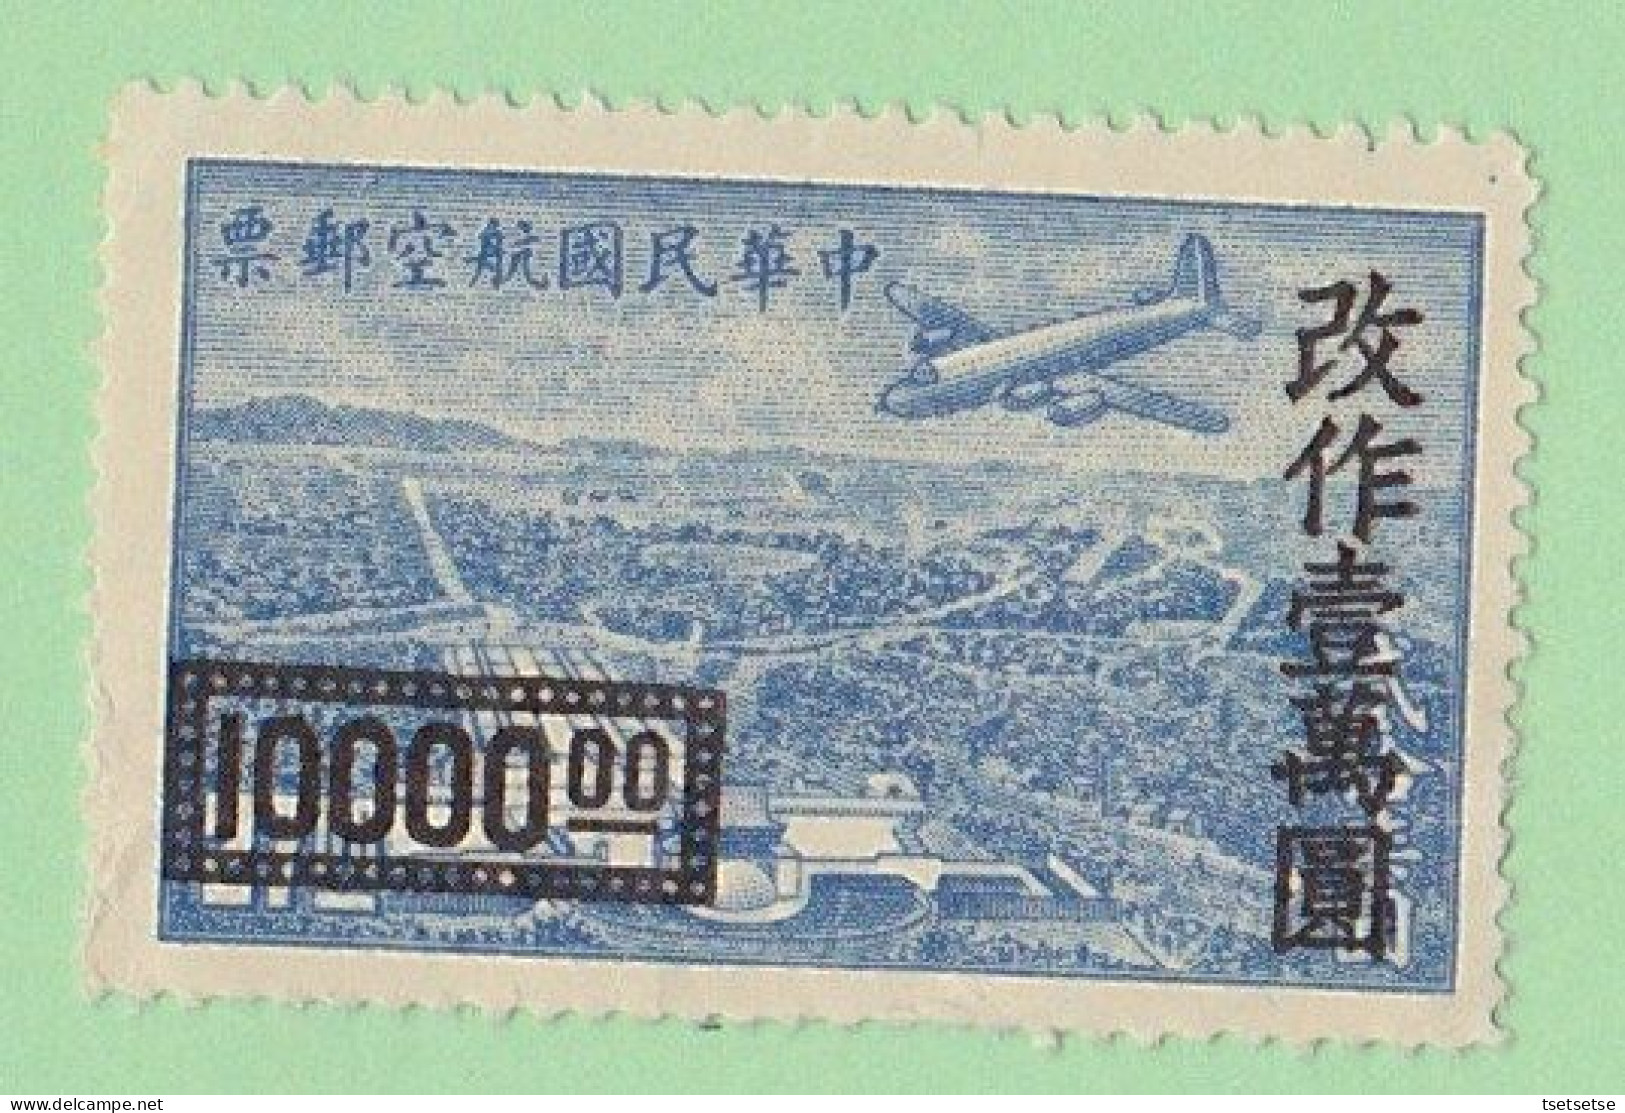 $85 CV! 1963 RO China Taiwan Land To The Tillers Stamp Set, #1383, Mint Unused VF H OG + Mint #C61 - Ungebraucht